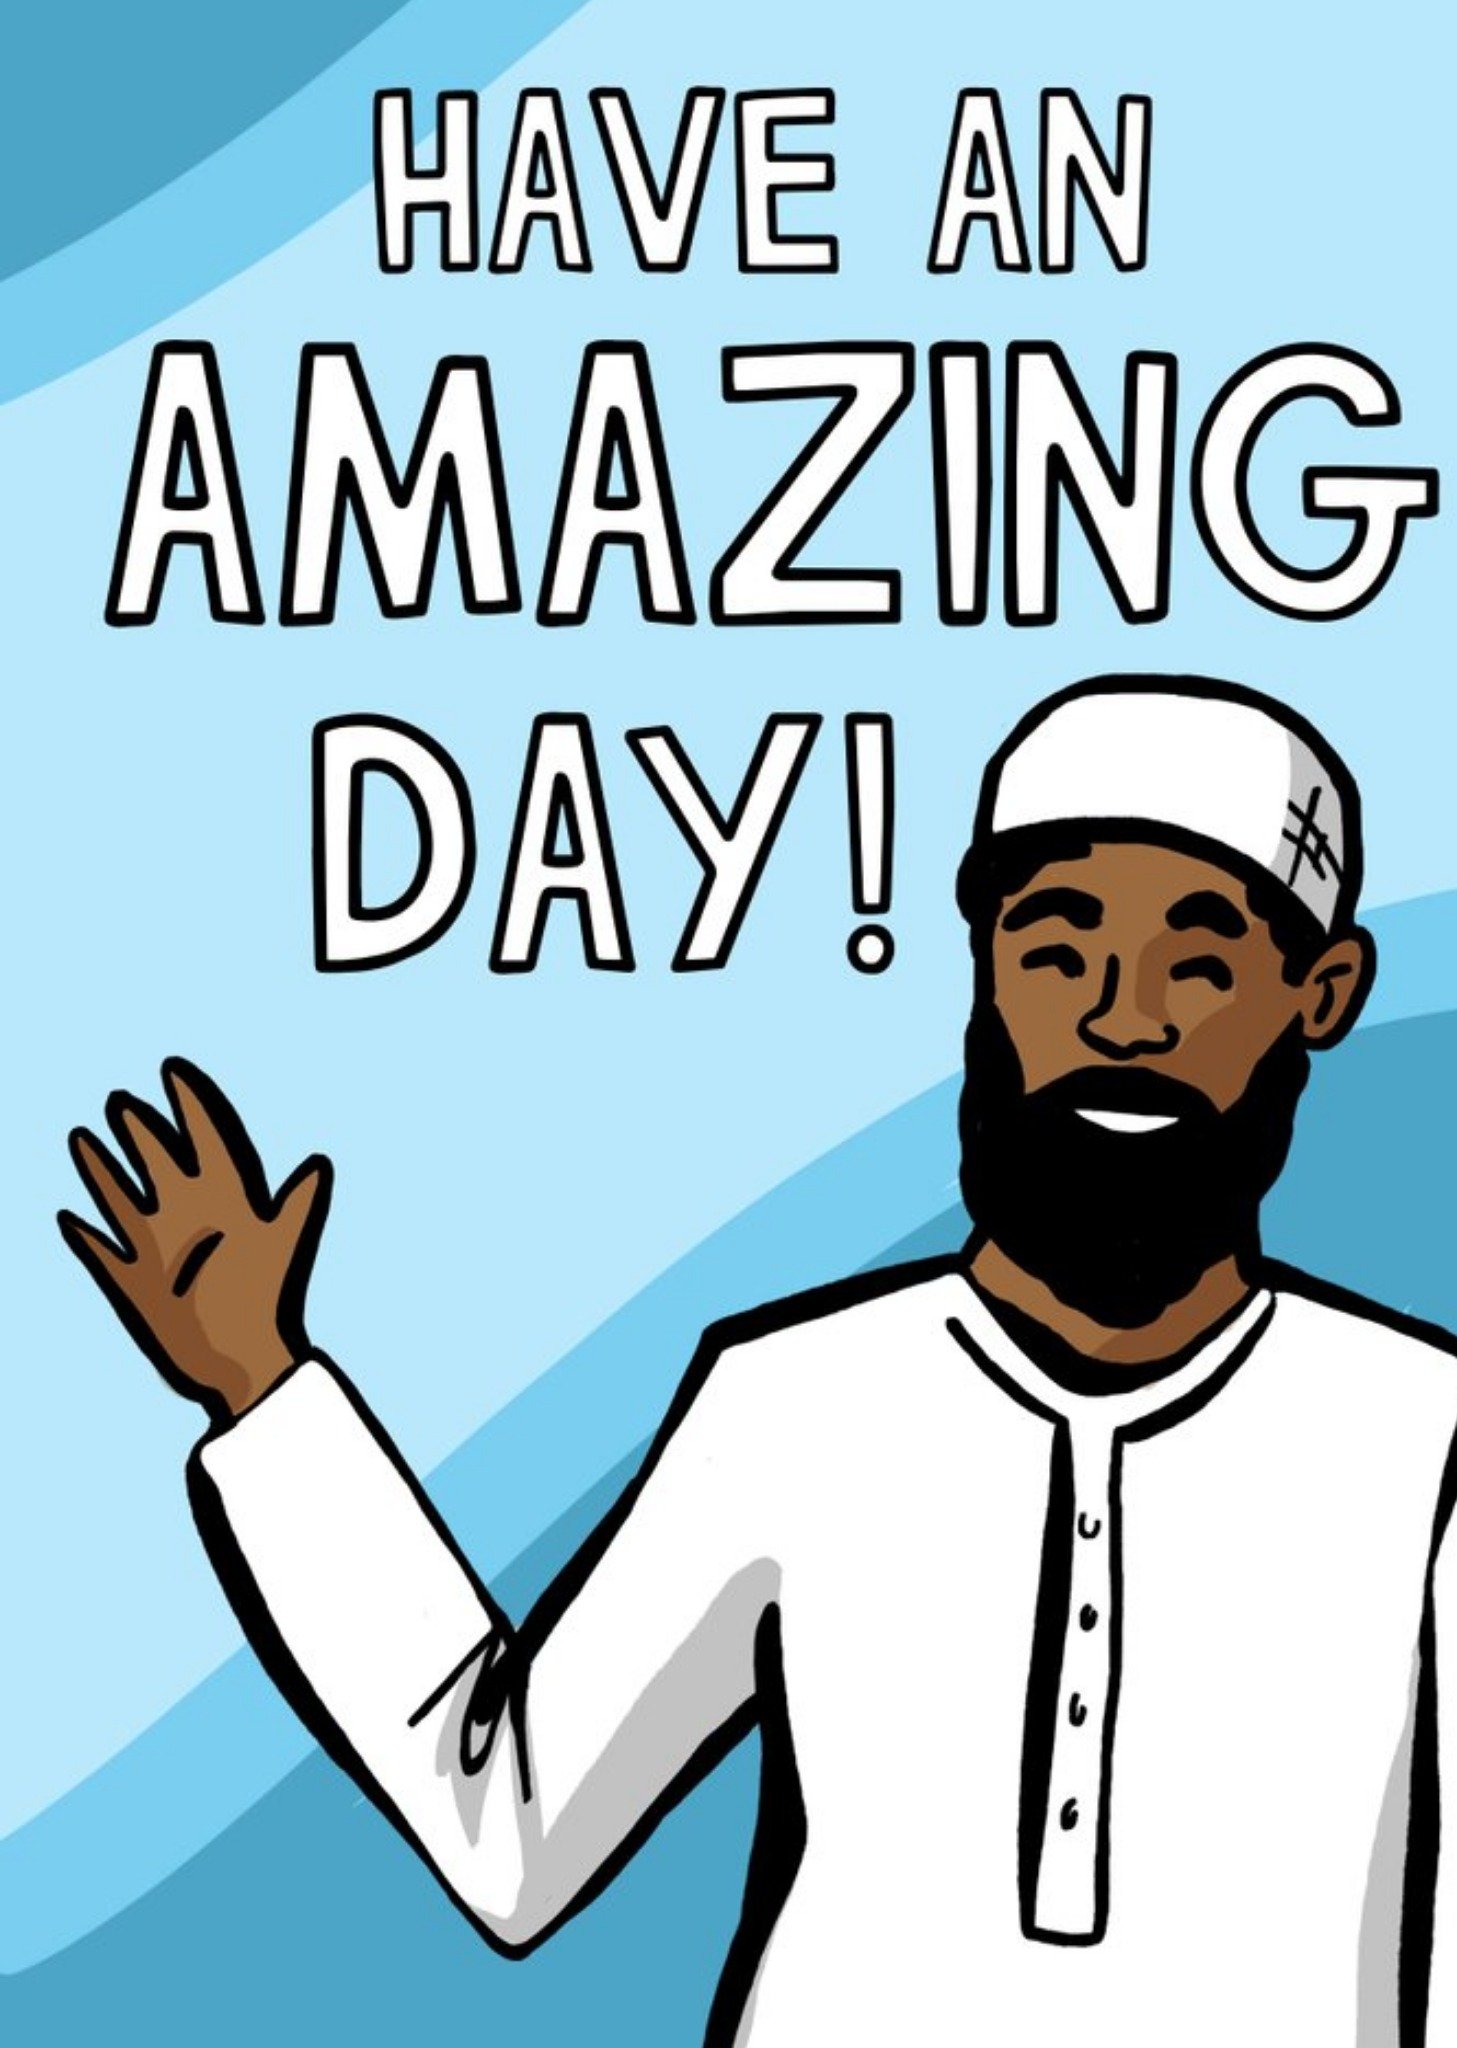 Moonpig Illustration Of A Muslim Man Smiling And Waving Have An Amazing Day Card, Large